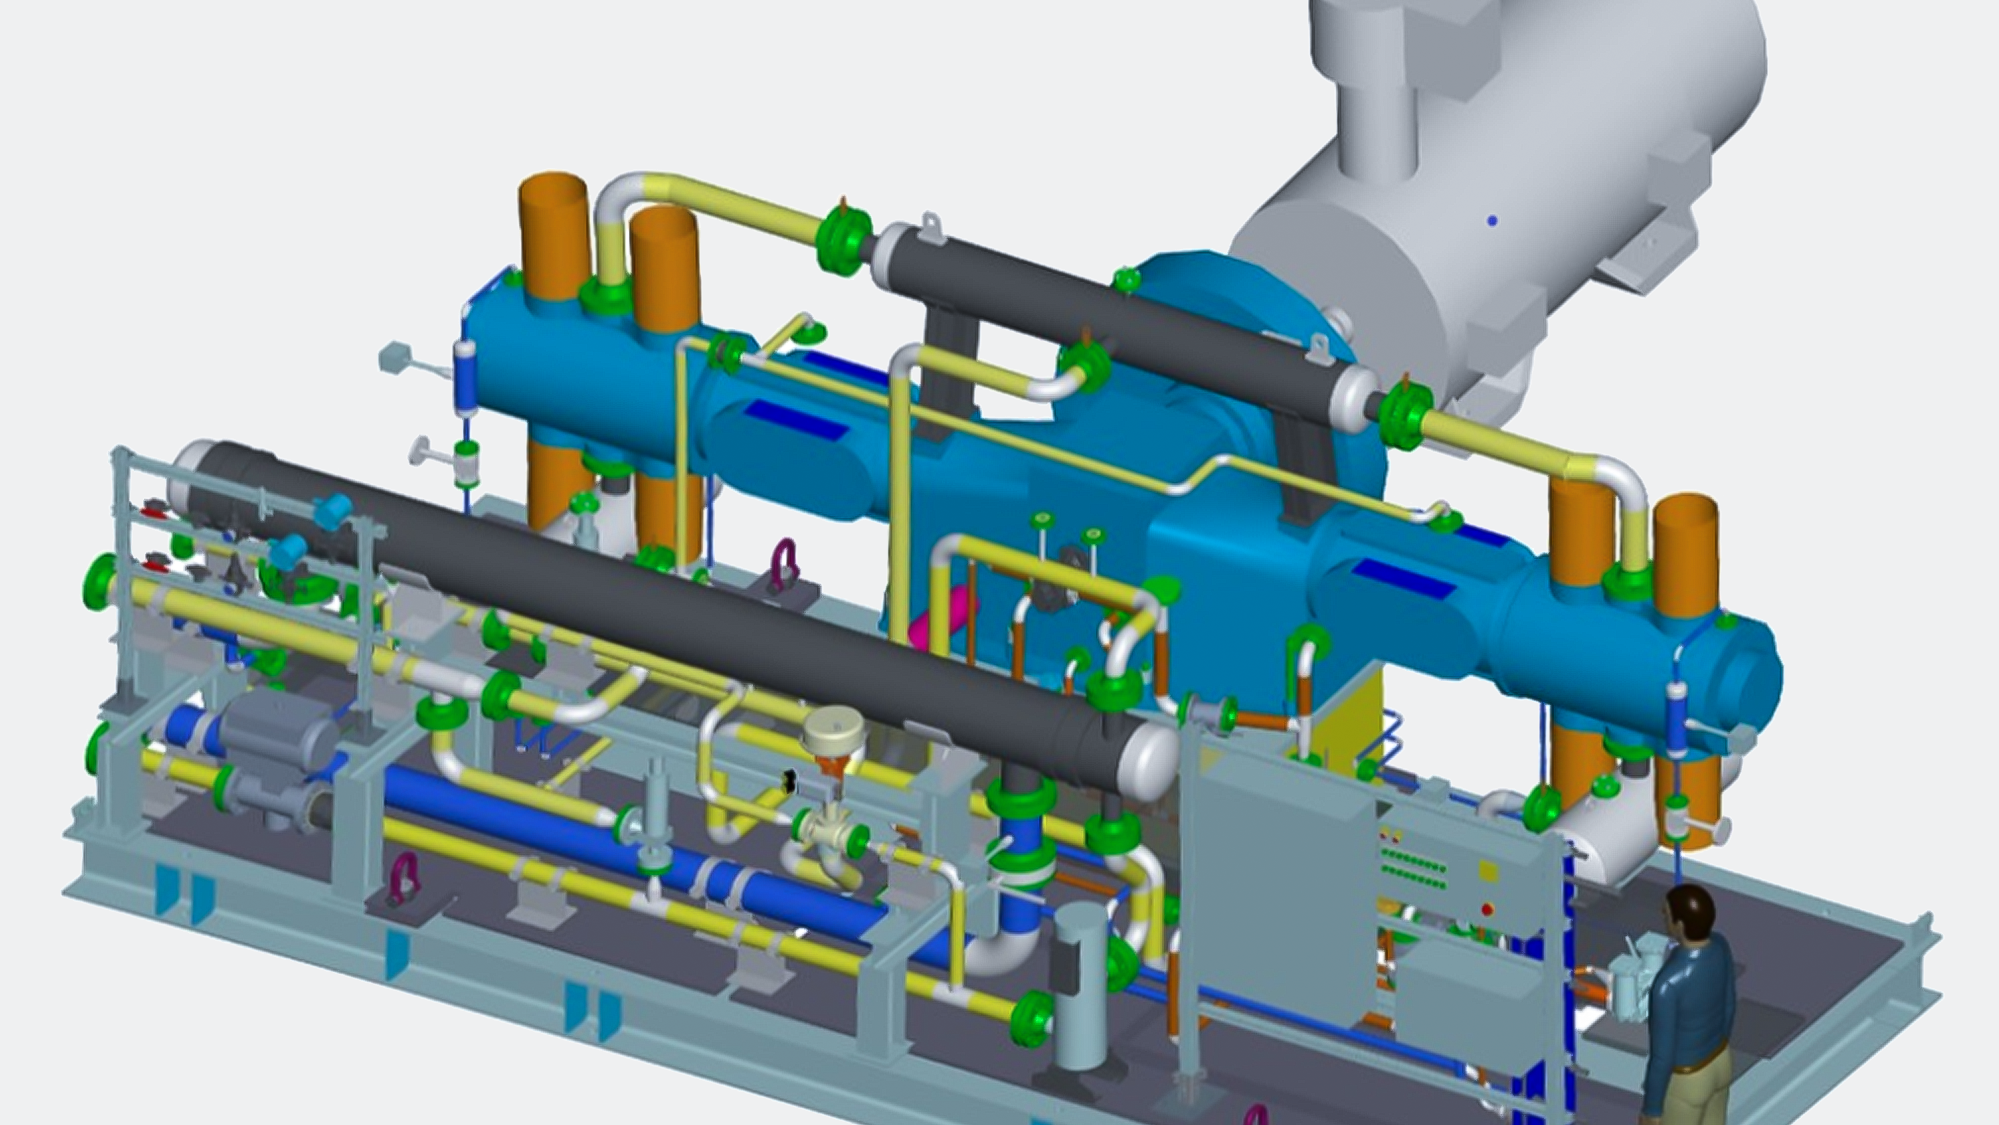 Installation plan compressor Lingen for the supply of hydrogen from electrolysis for the pipelines